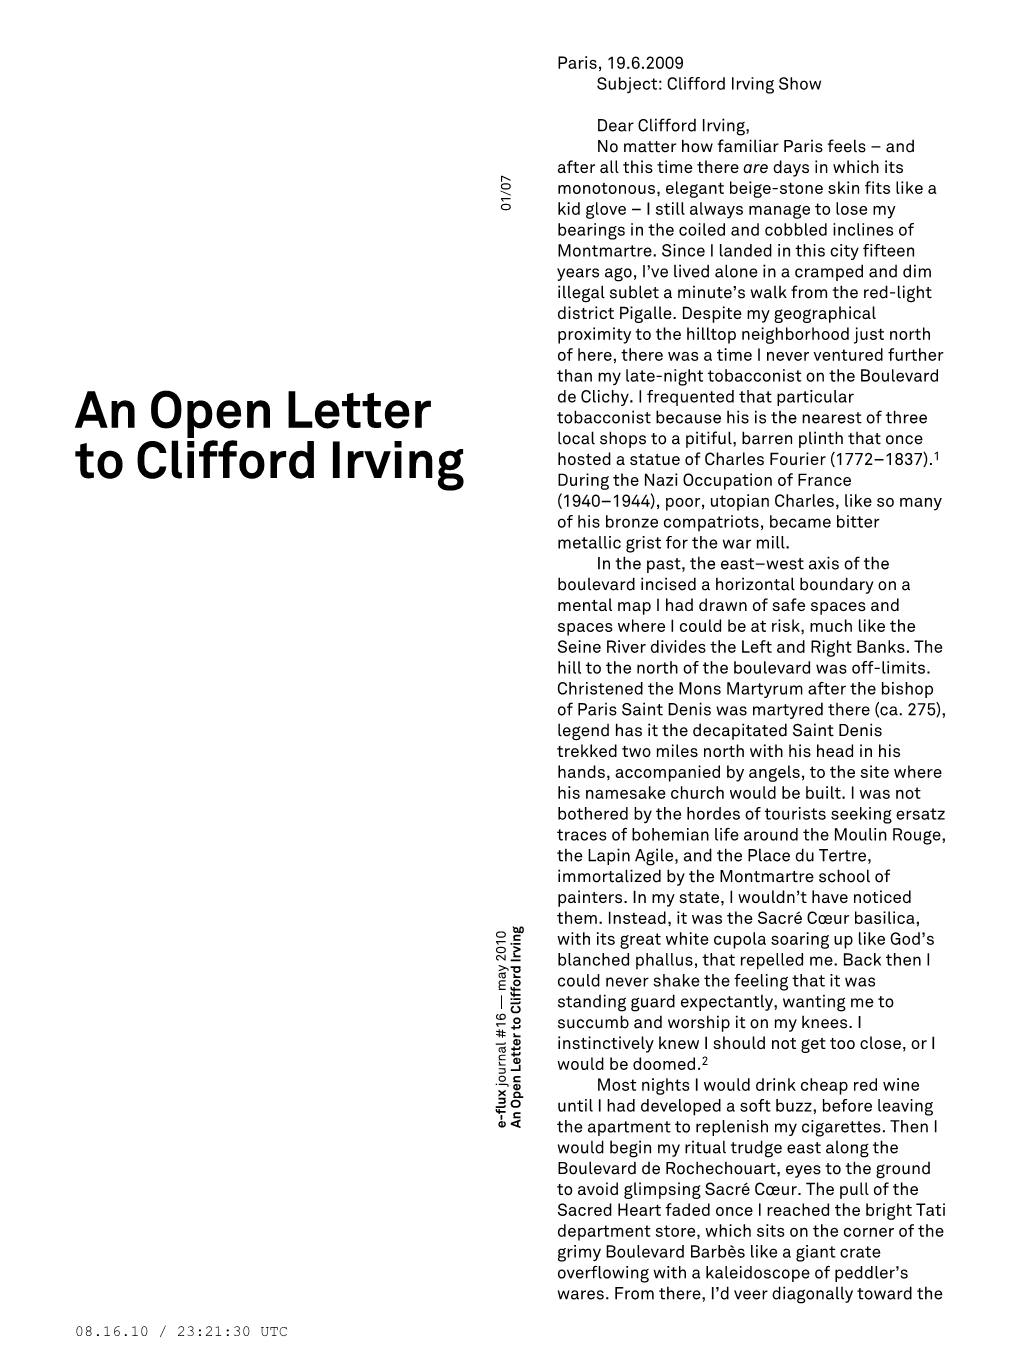 An Open Letter to Clifford Irving